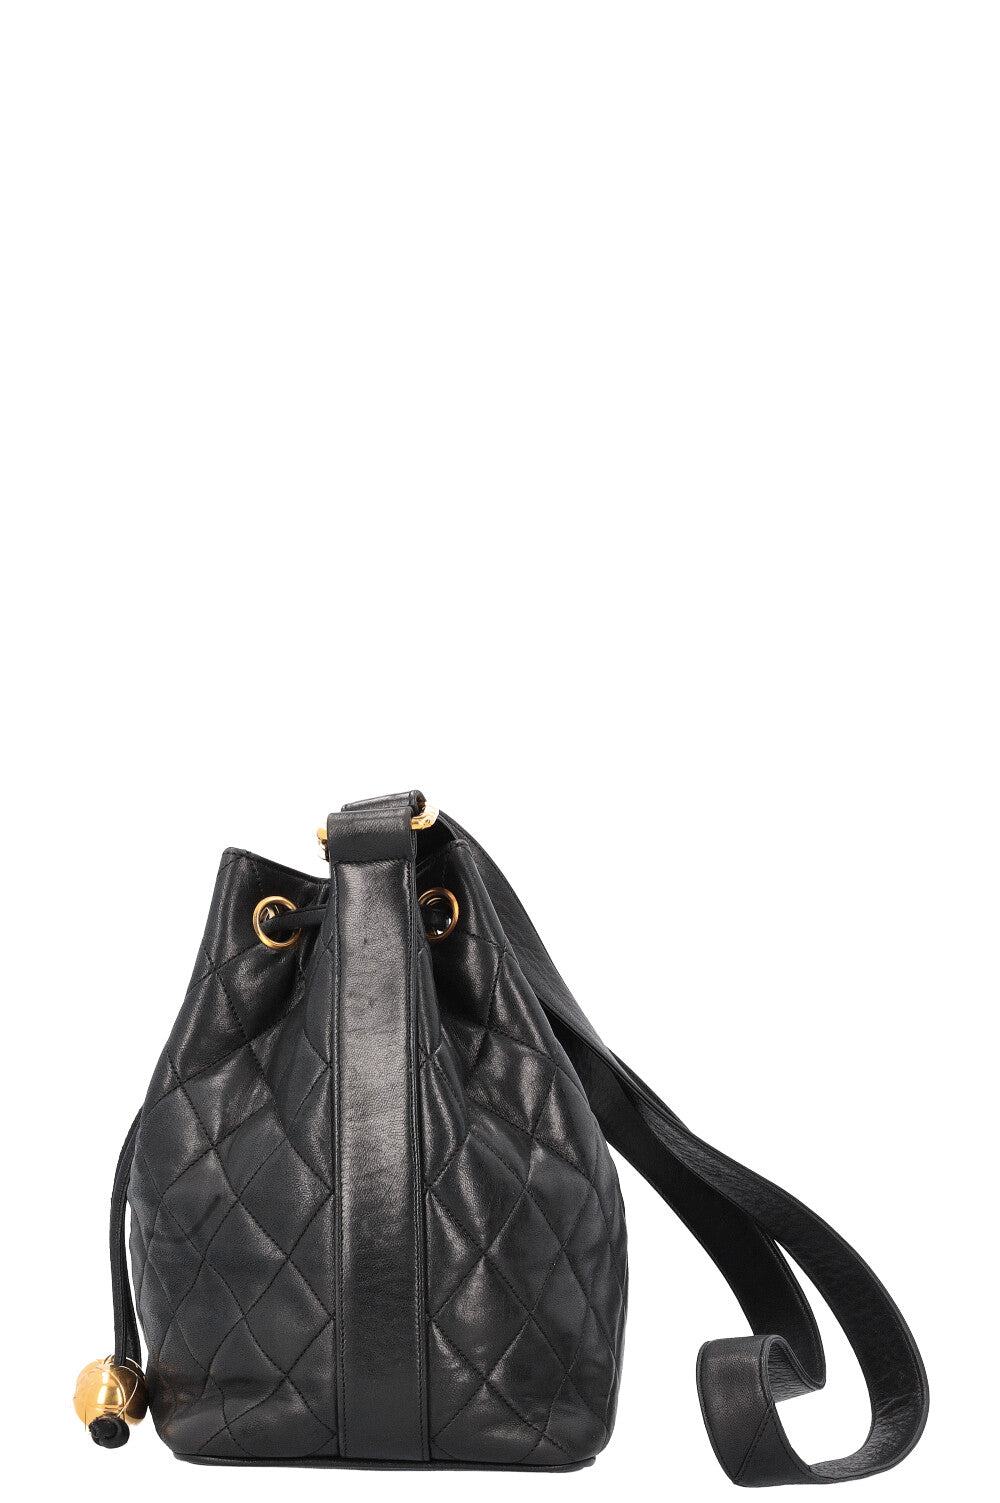 CHANEL Quilted Drawstring Bucket Bag Black